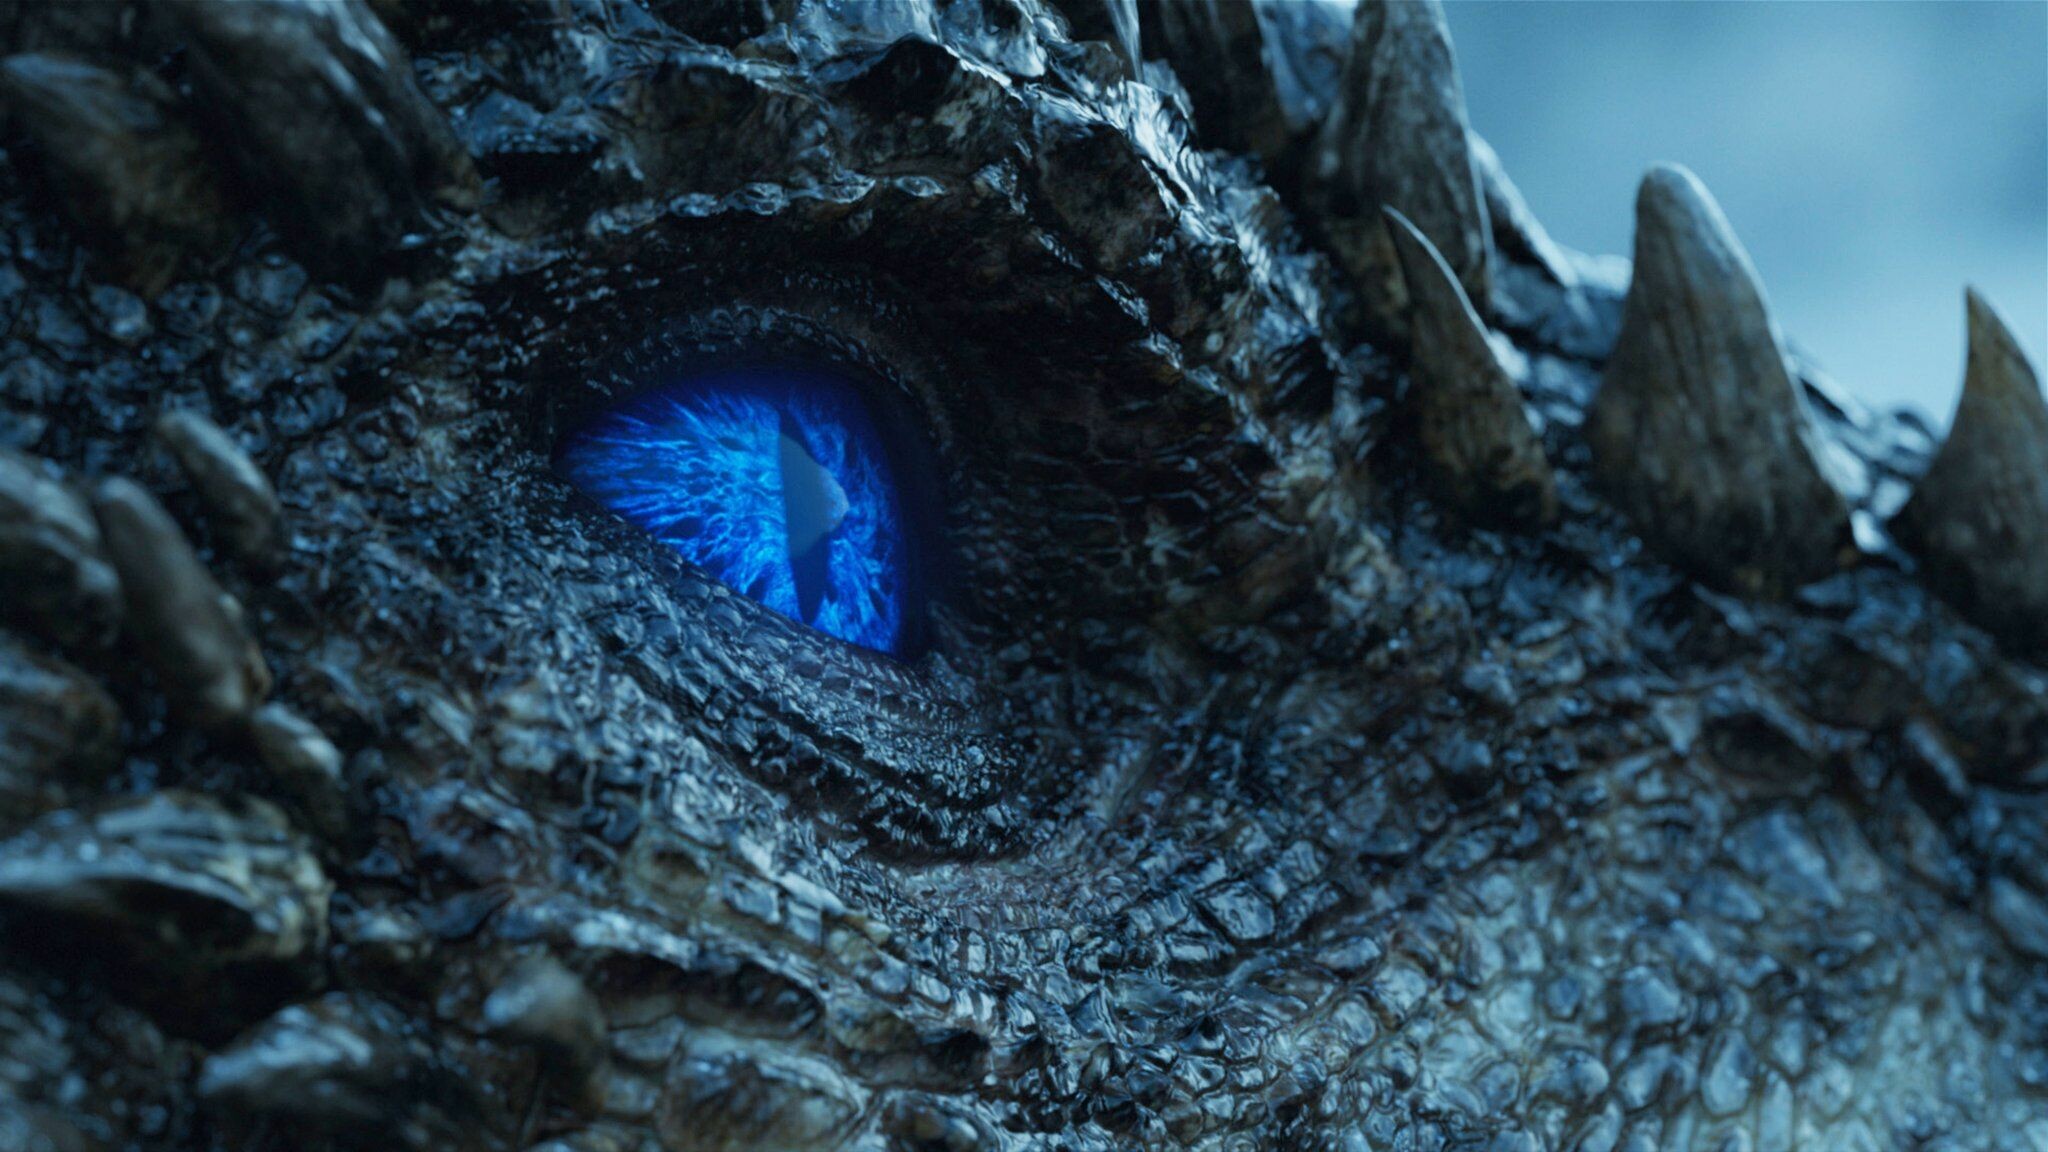 45+ Game of Thrones Dragons Wallpapers: HD, 4K, 5K for PC and Mobile |  Download free images for iPhone, Android